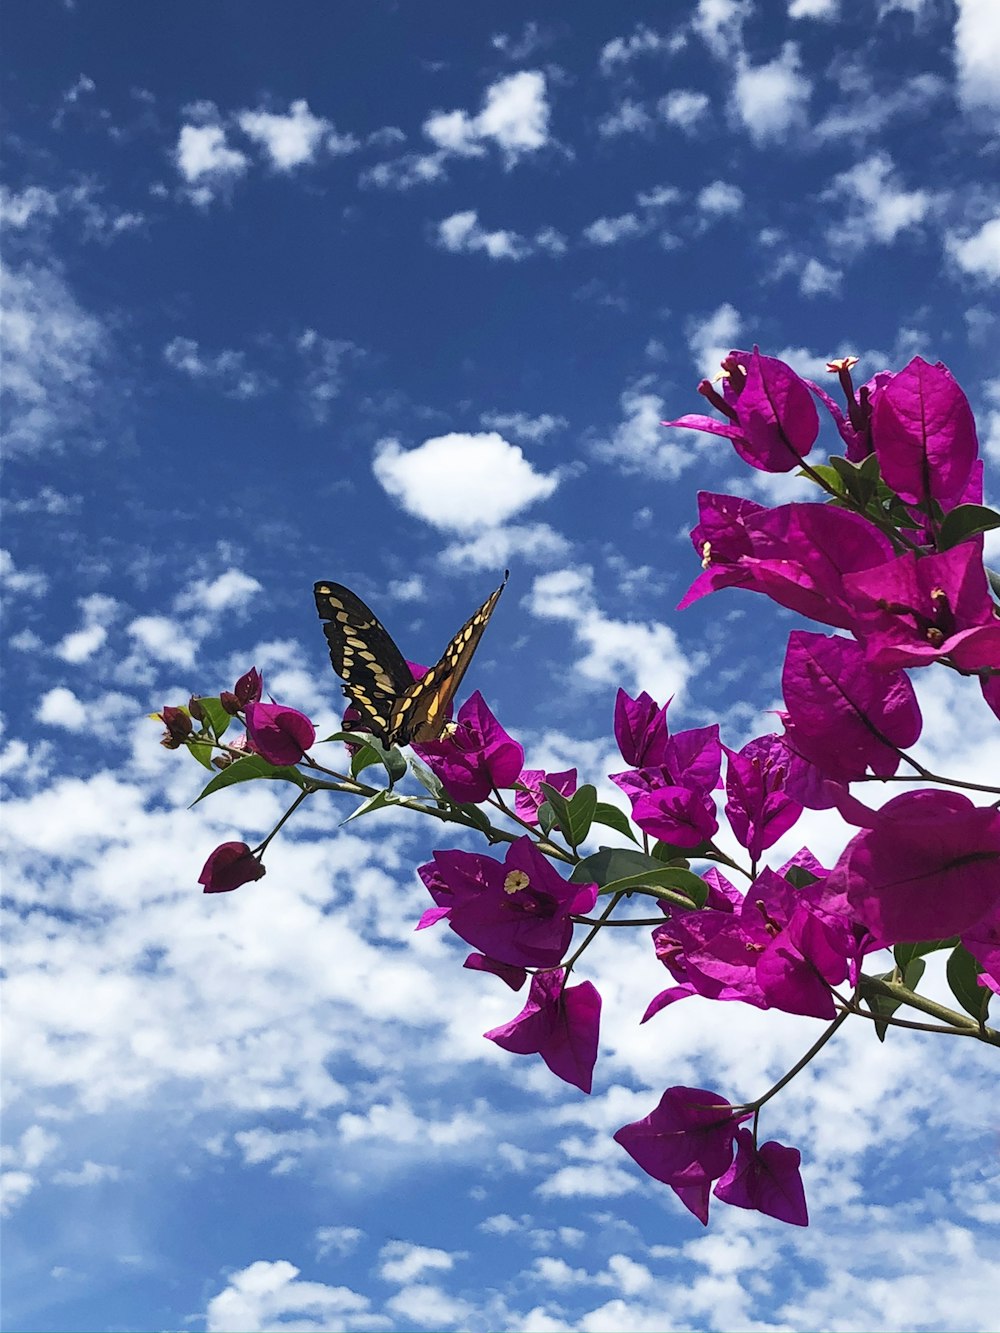 red and yellow butterfly on red flower under blue sky during daytime